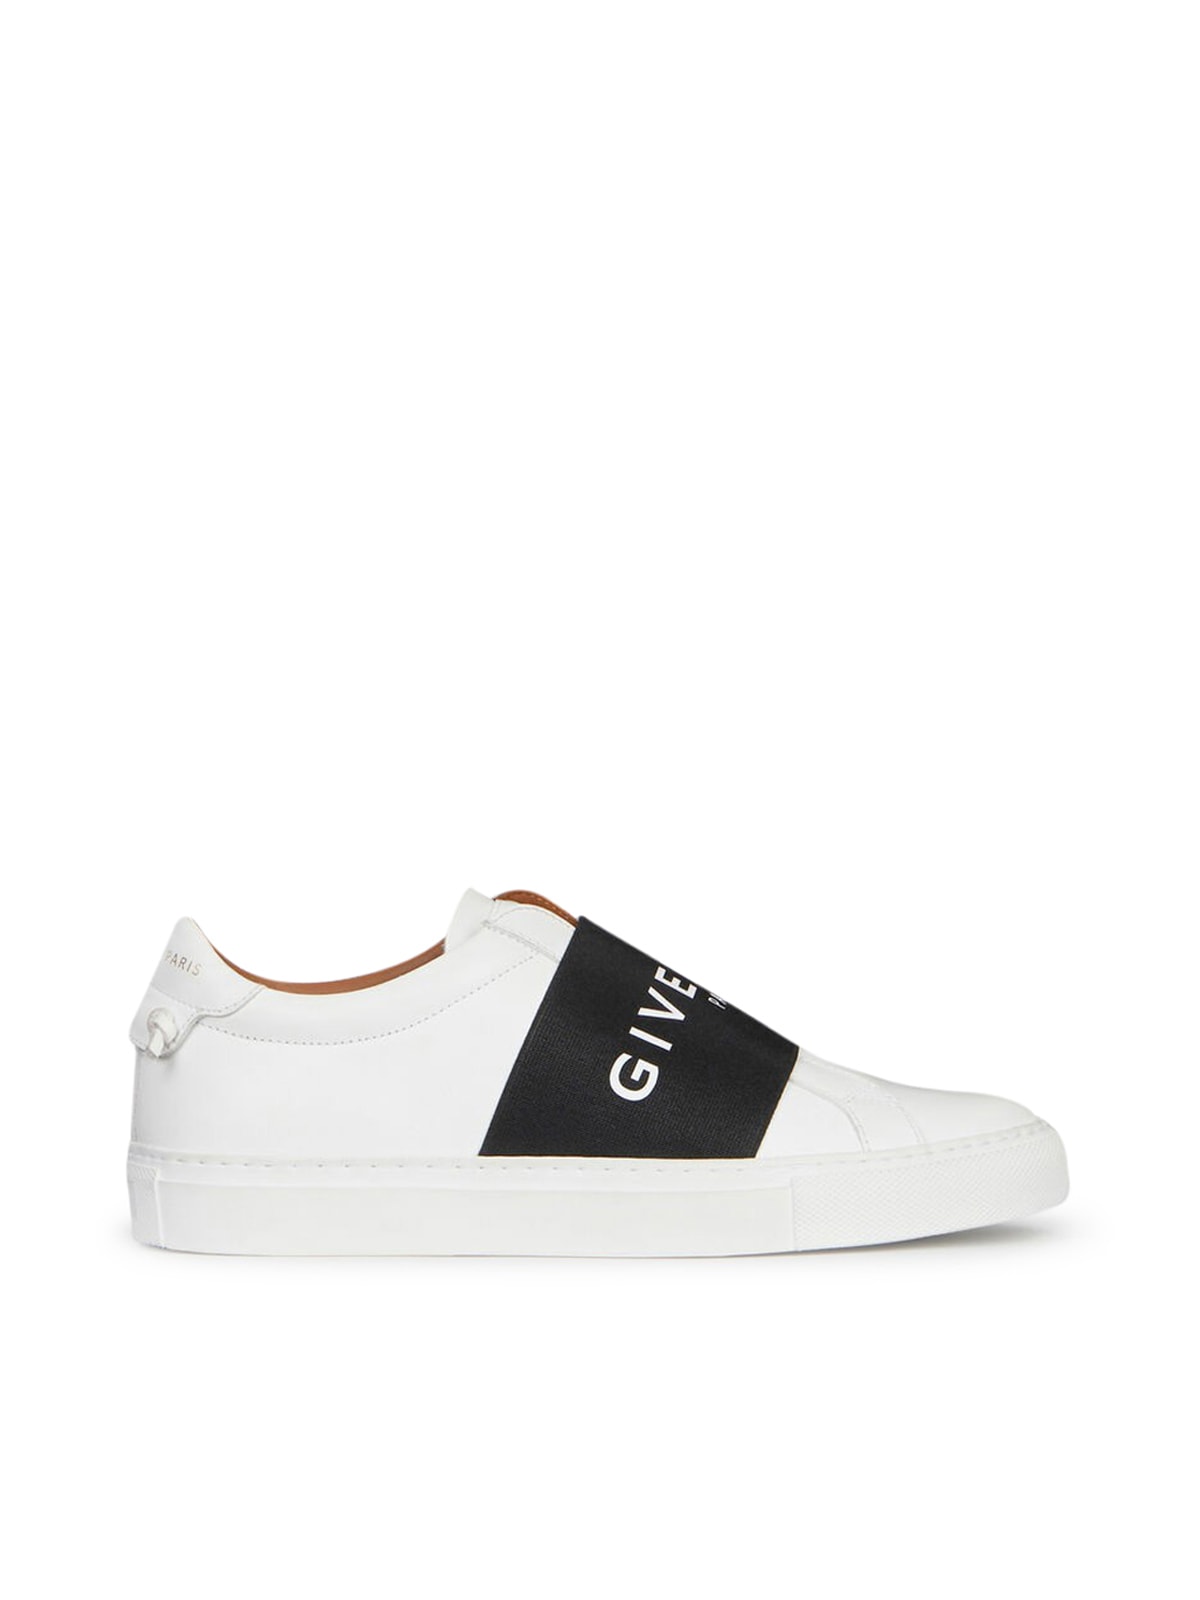 Buy Givenchy Urban Street Low Sneaker With Elastic online, shop Givenchy shoes with free shipping